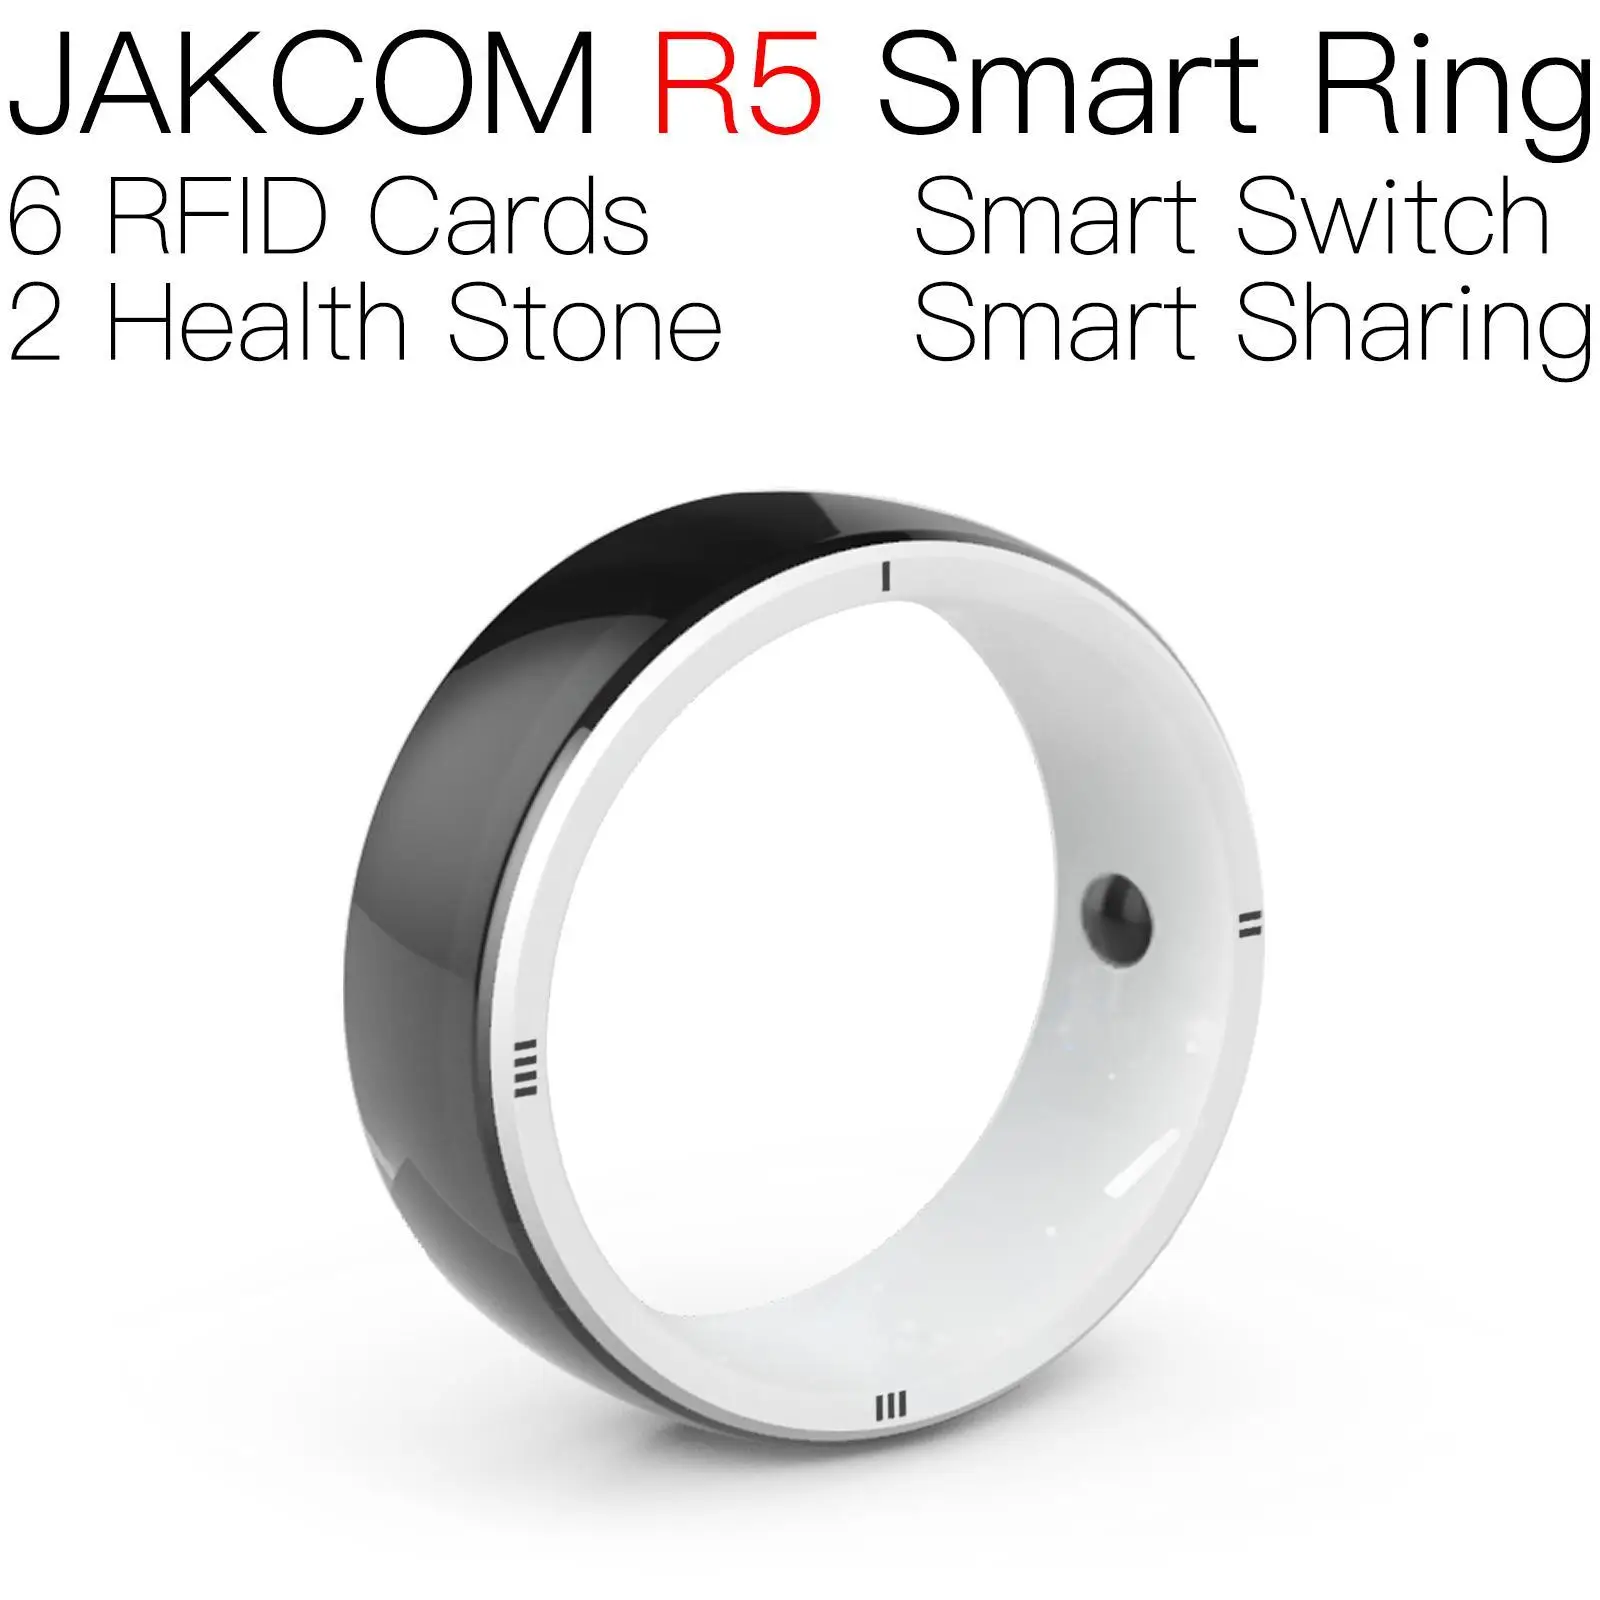 

JAKCOM R5 Smart Ring Nice than ebook reader travel accessories fingerboards headset first order deals free shipping